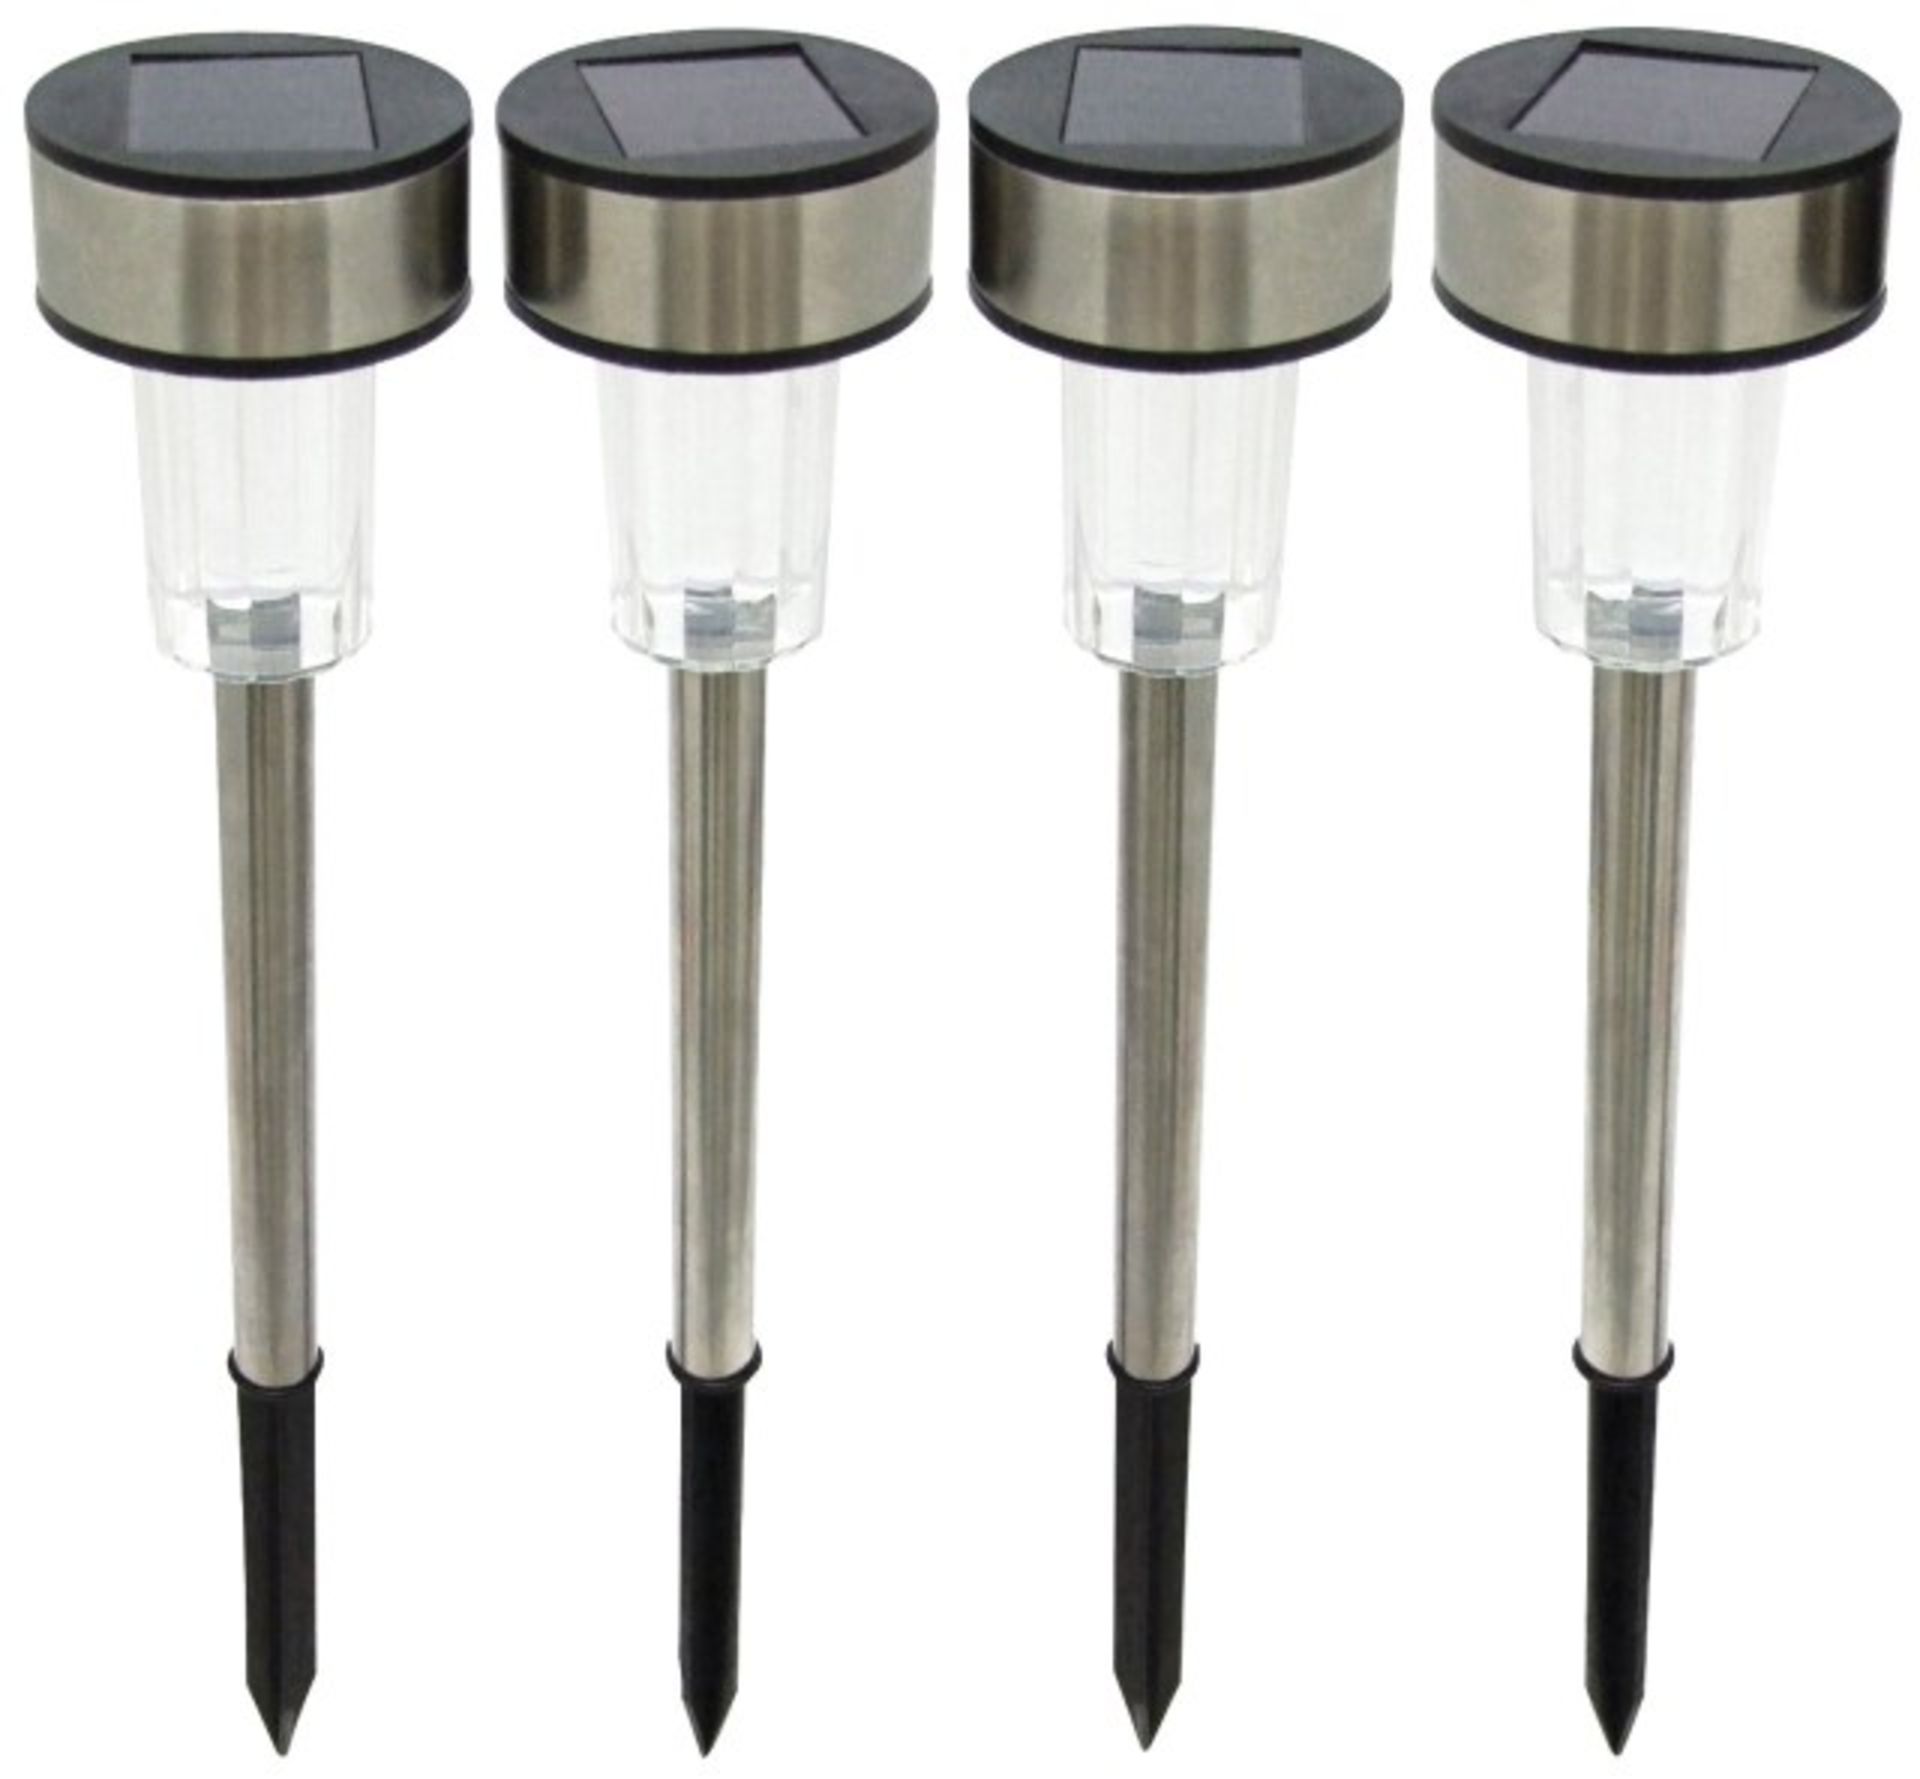 V *TRADE QTY* Brand New Set Of 4 Kempton Stainless Steel Solar Lights X 8 YOUR BID PRICE TO BE